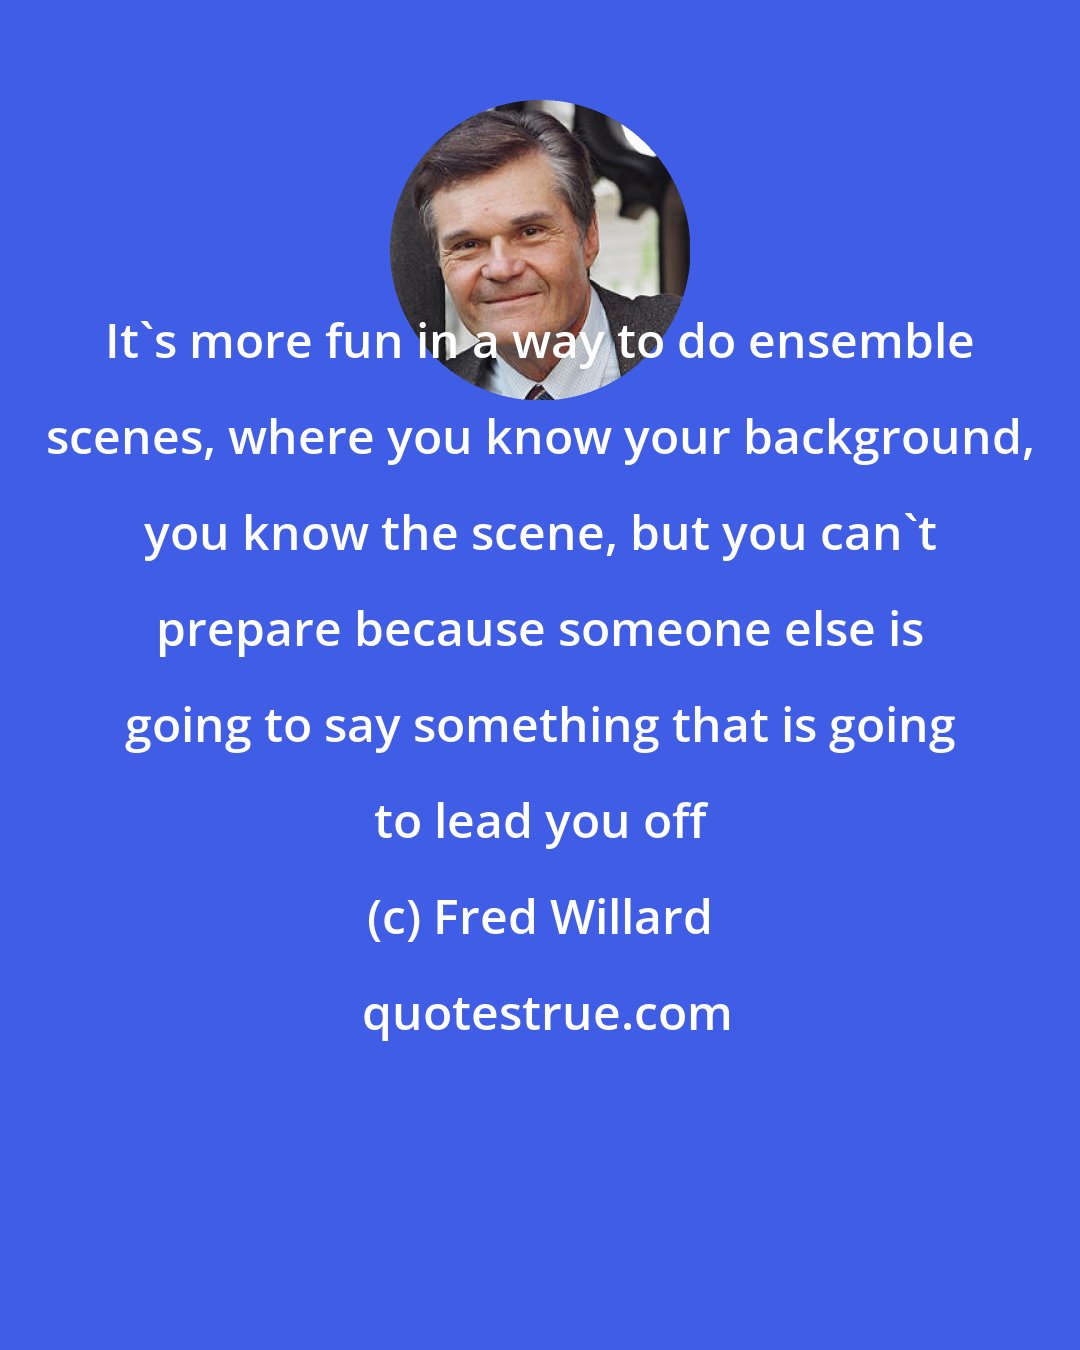 Fred Willard: It's more fun in a way to do ensemble scenes, where you know your background, you know the scene, but you can't prepare because someone else is going to say something that is going to lead you off